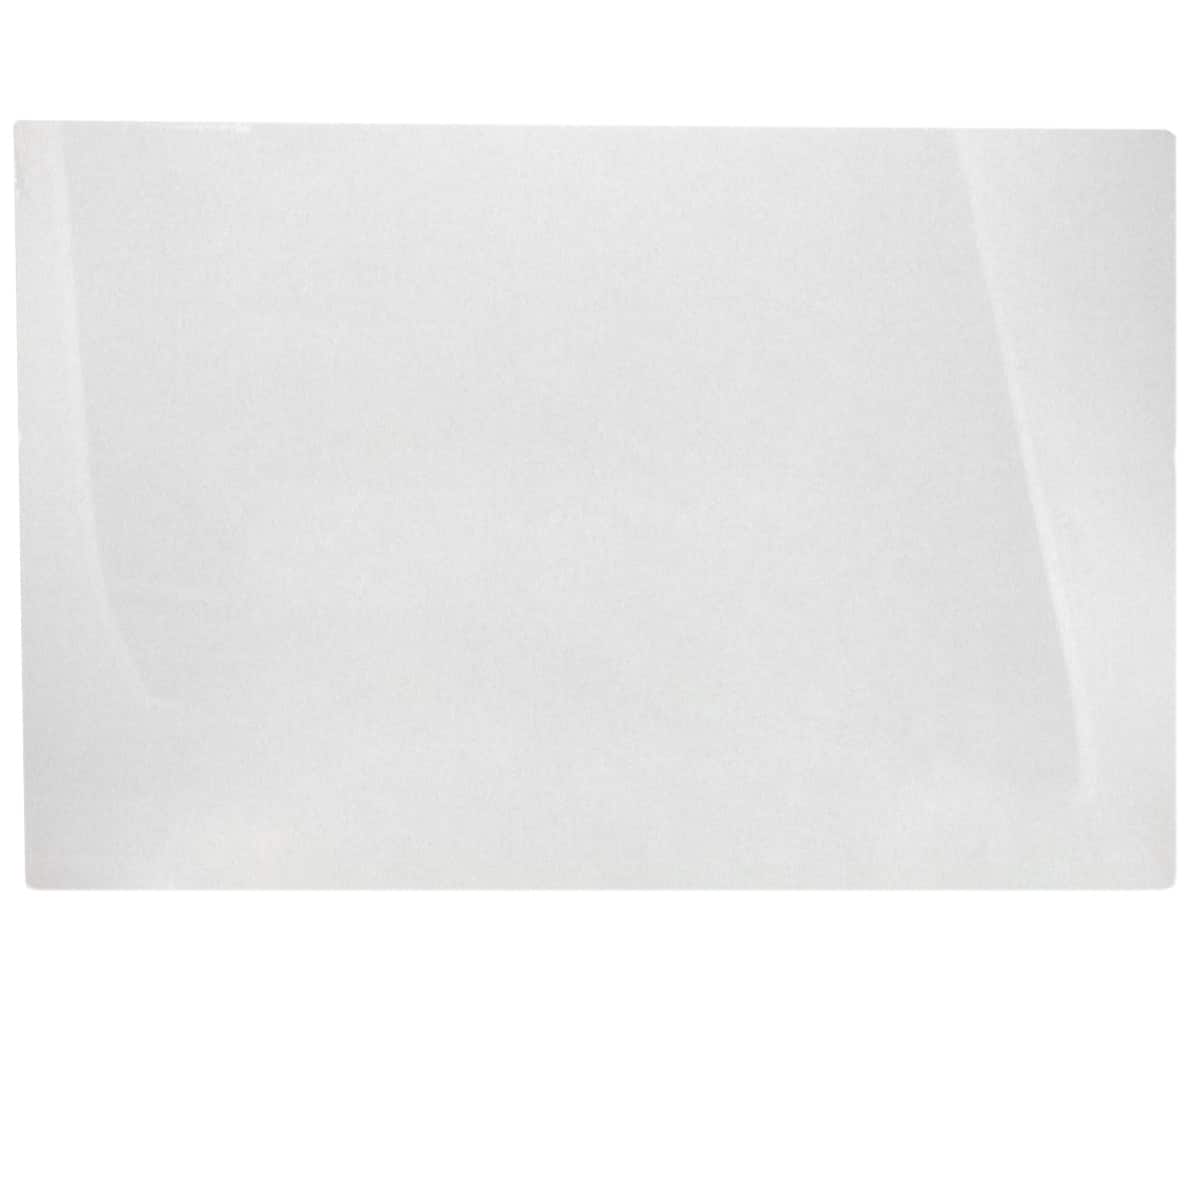 White Board Sticker Dry Erase Message Board Film Decal for Home and Office